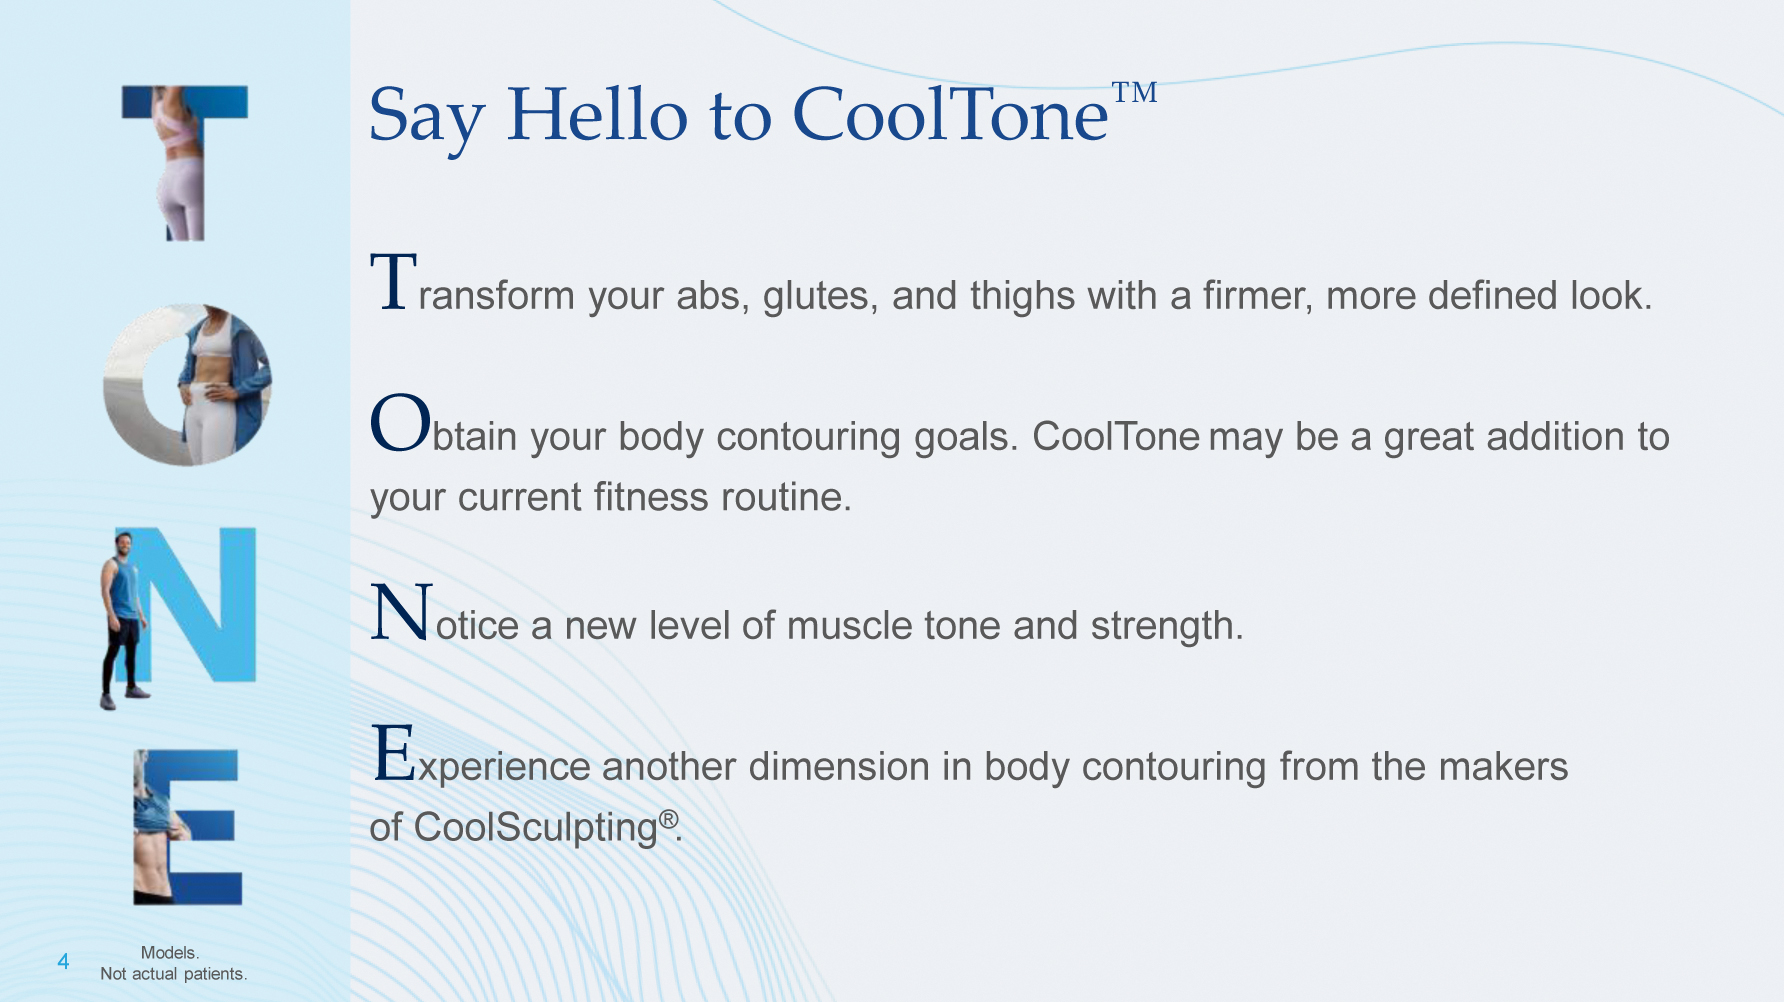 Say Hello to CoolTone